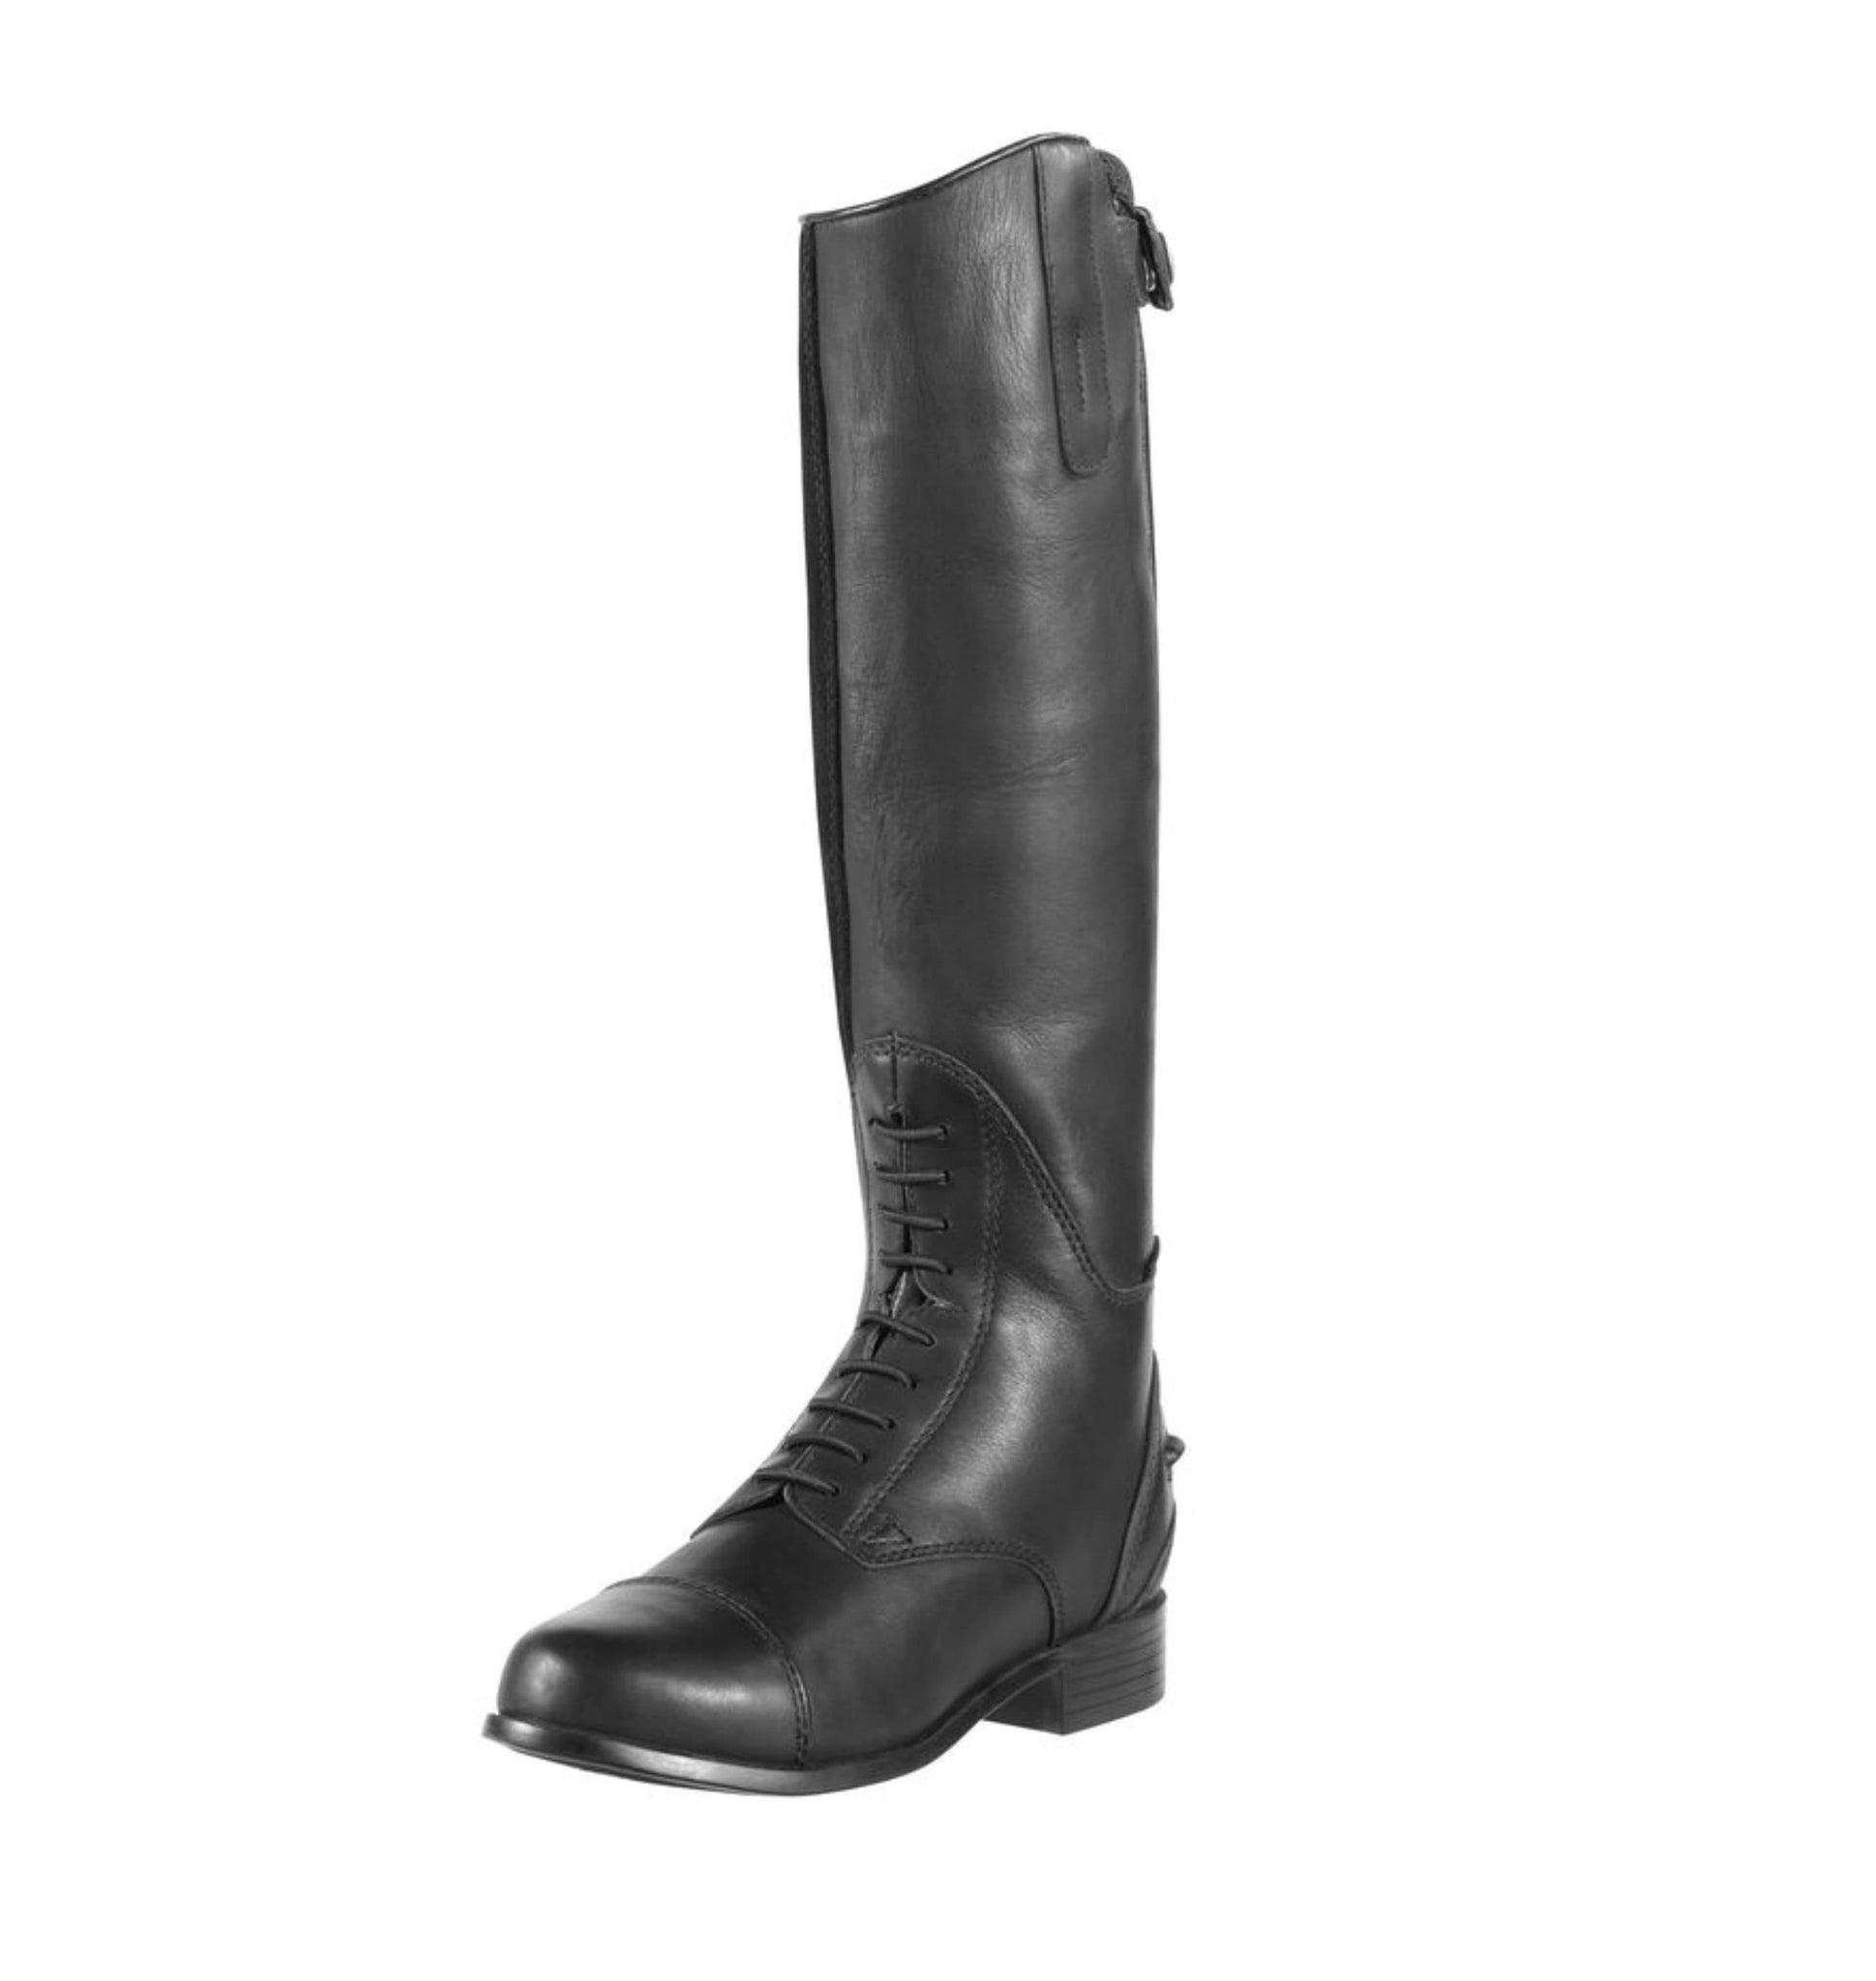 Ariat Bromont H2O Tall Boots